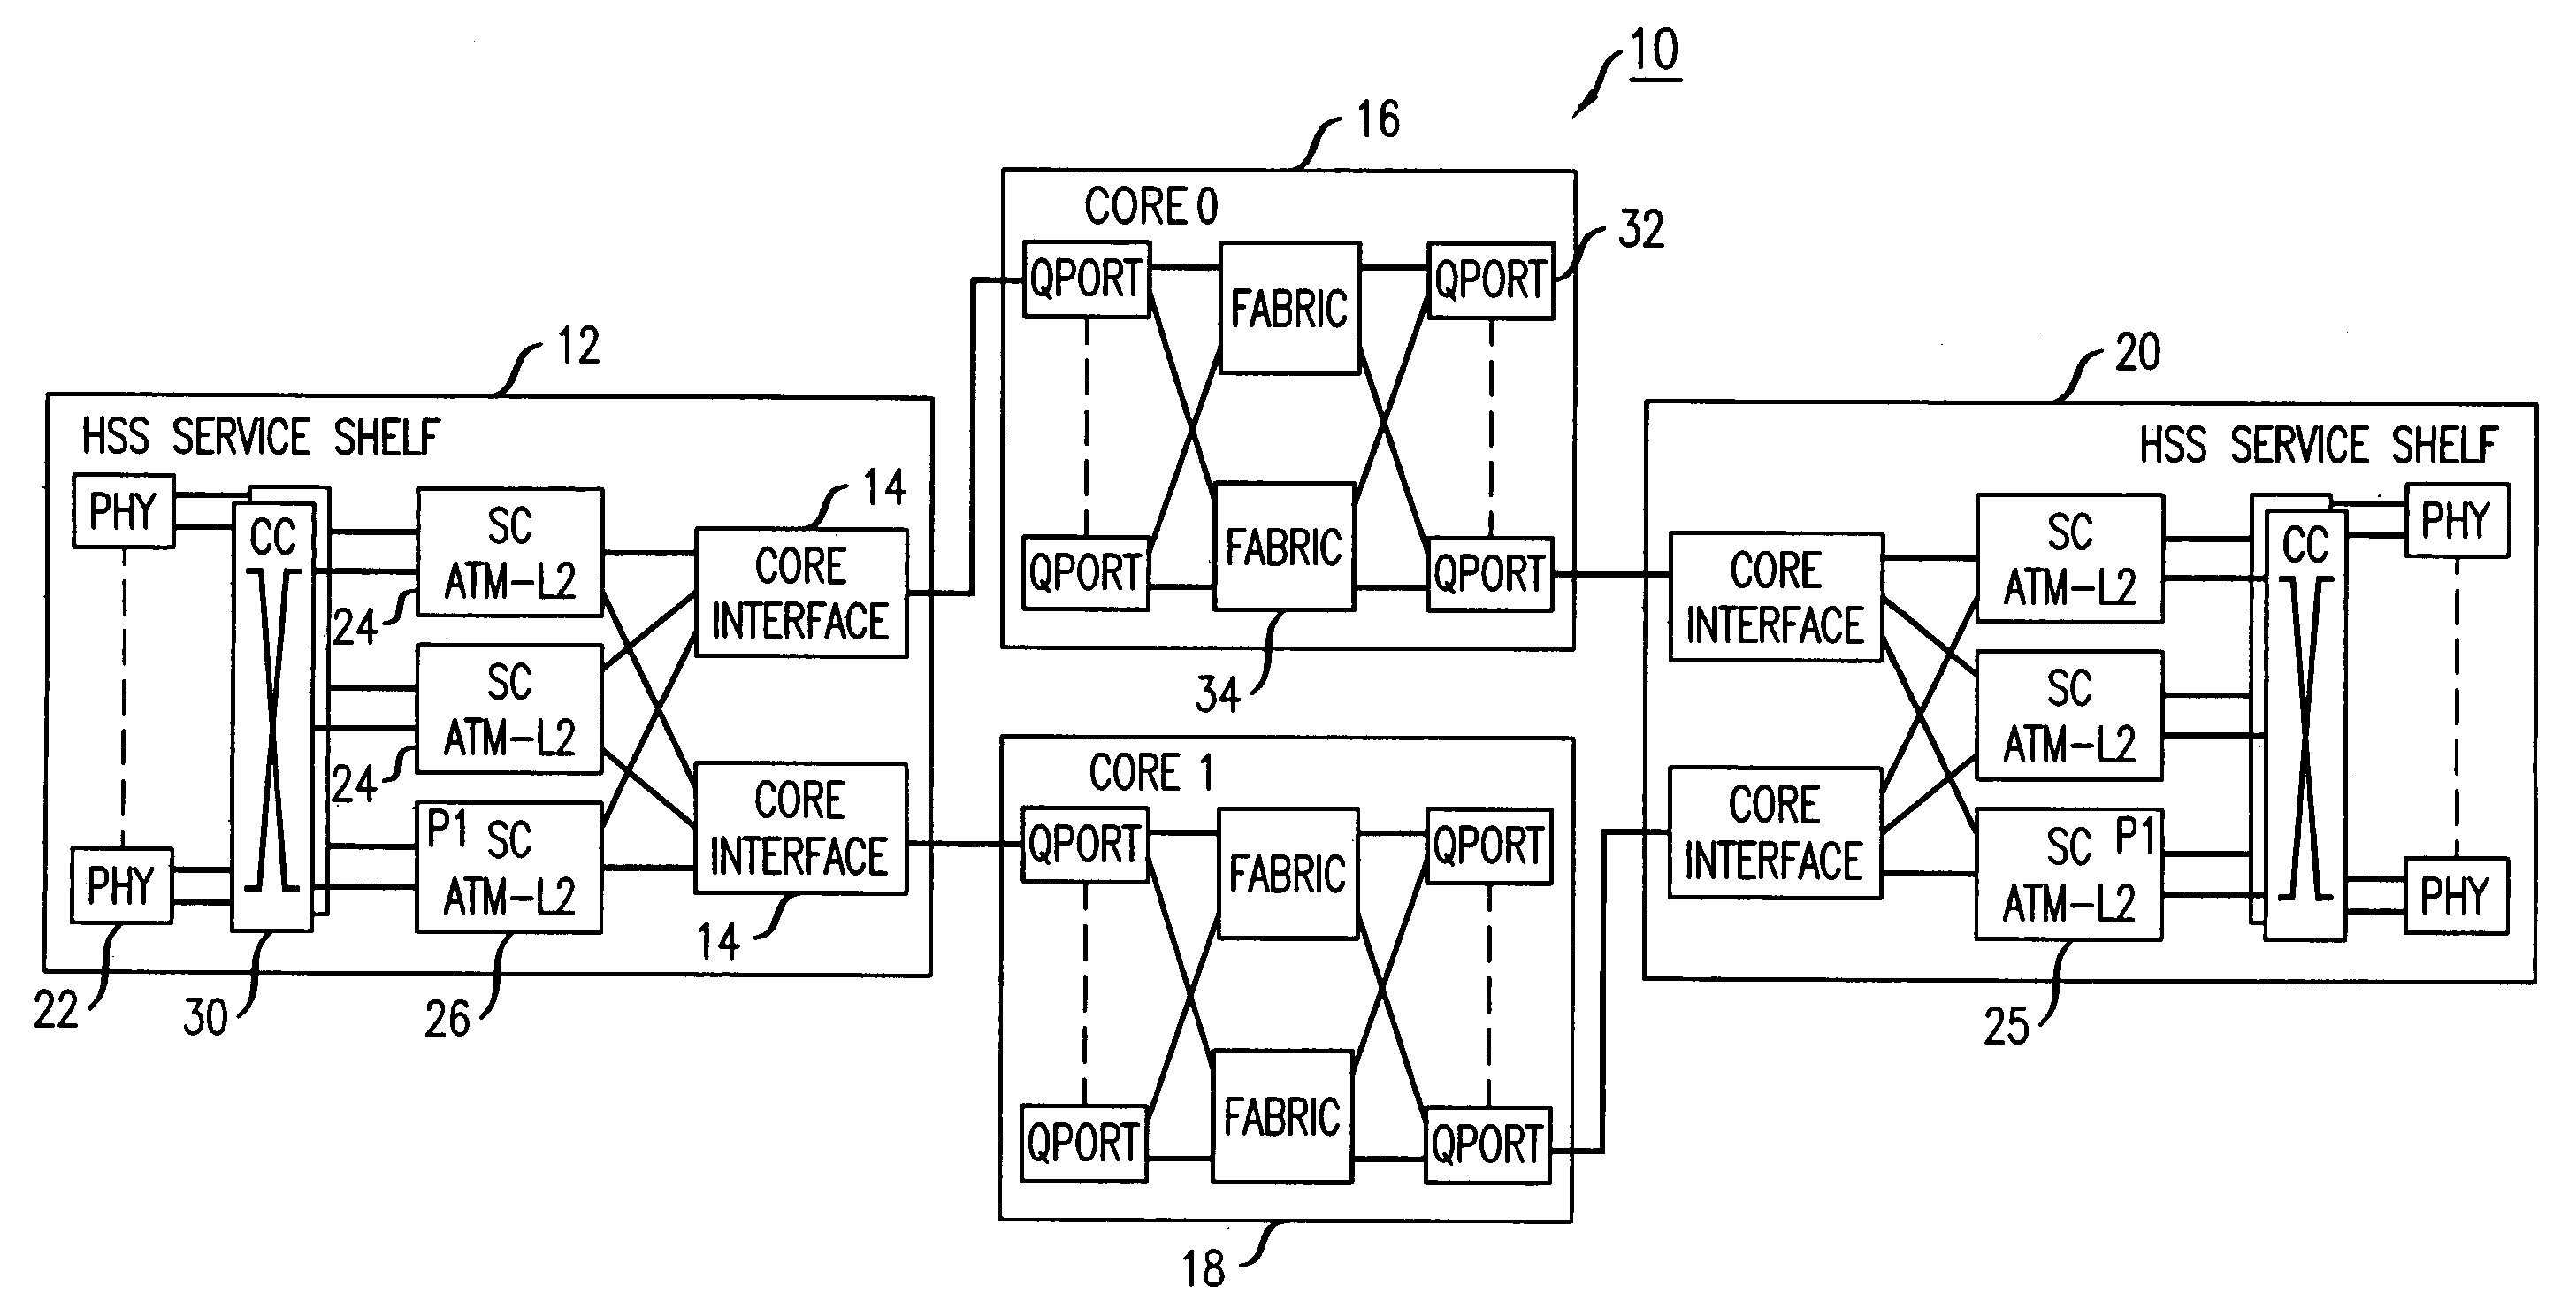 Apparatus and method for flow path based fault detection and service restoration in a packet based switching system